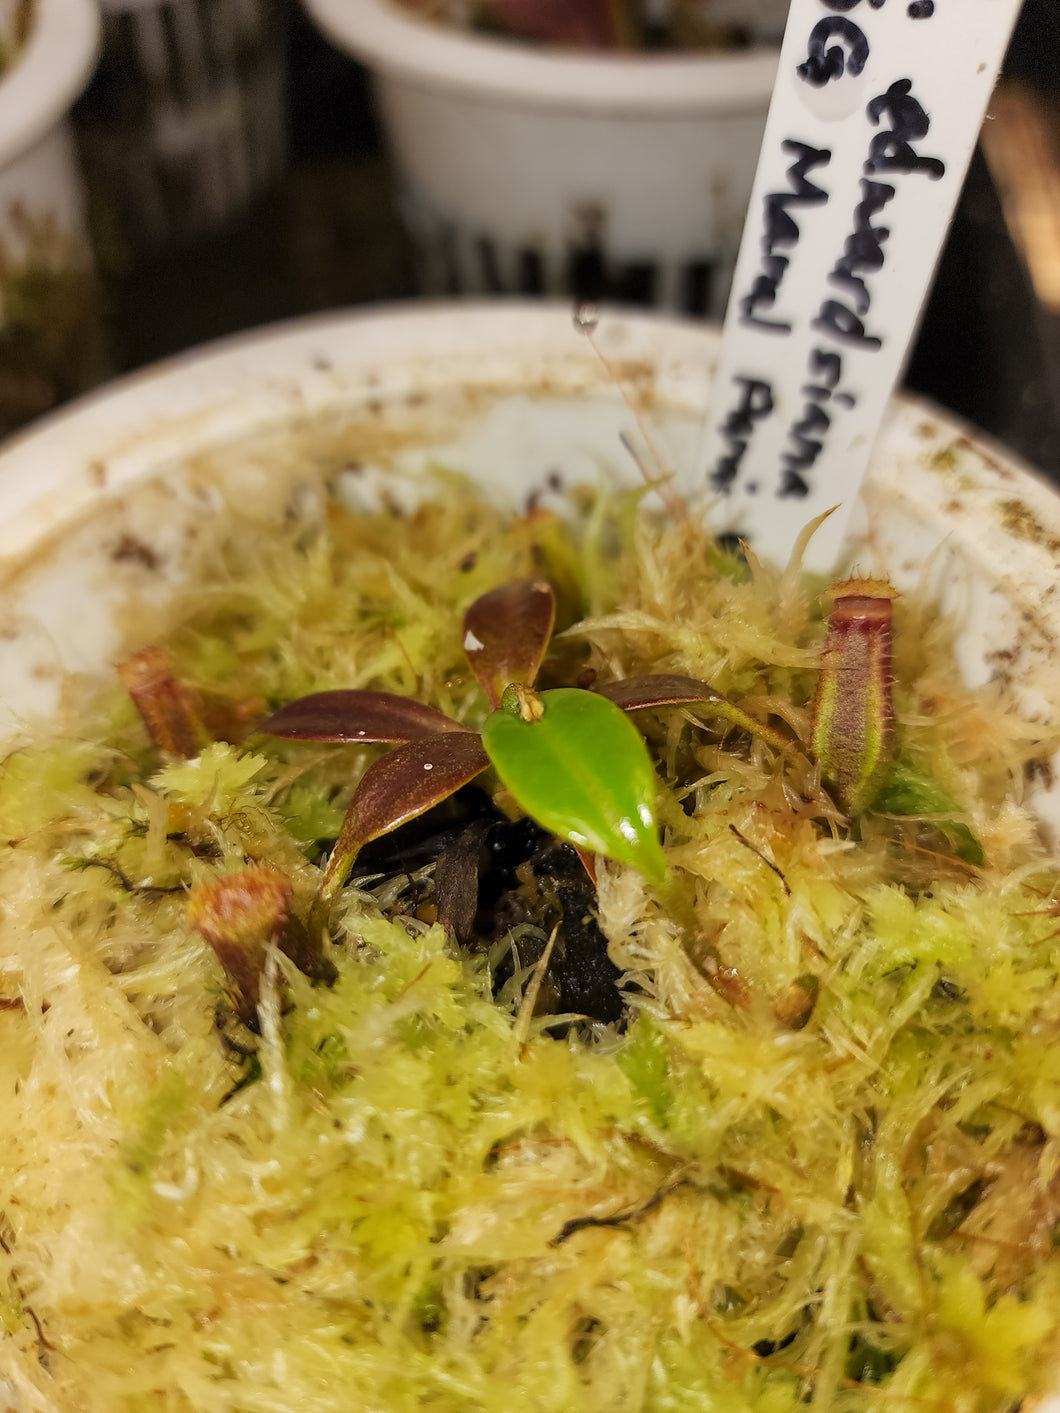 PURE Nepenthes edwardsiana seed grown Maral Parai! Exact small seedling pictured in 4